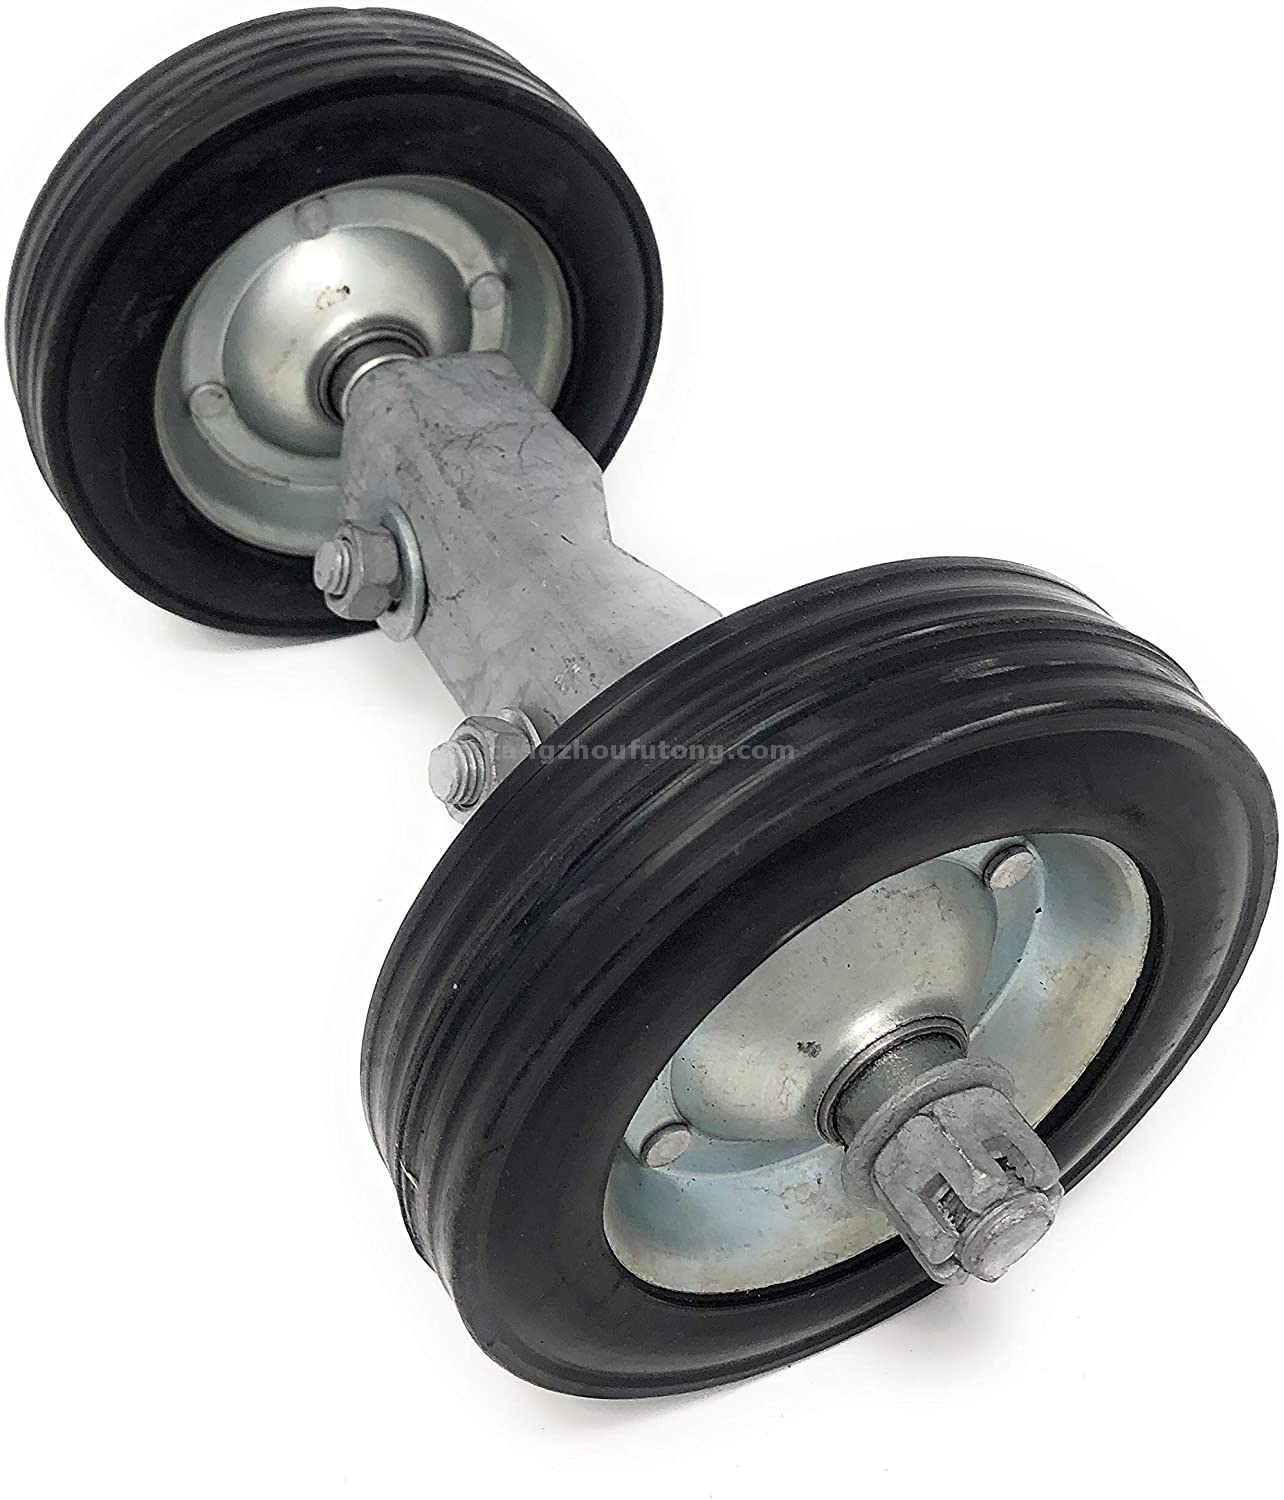 Universal Mount Solid Rubber Tire Spring-Loaded Gate Caster